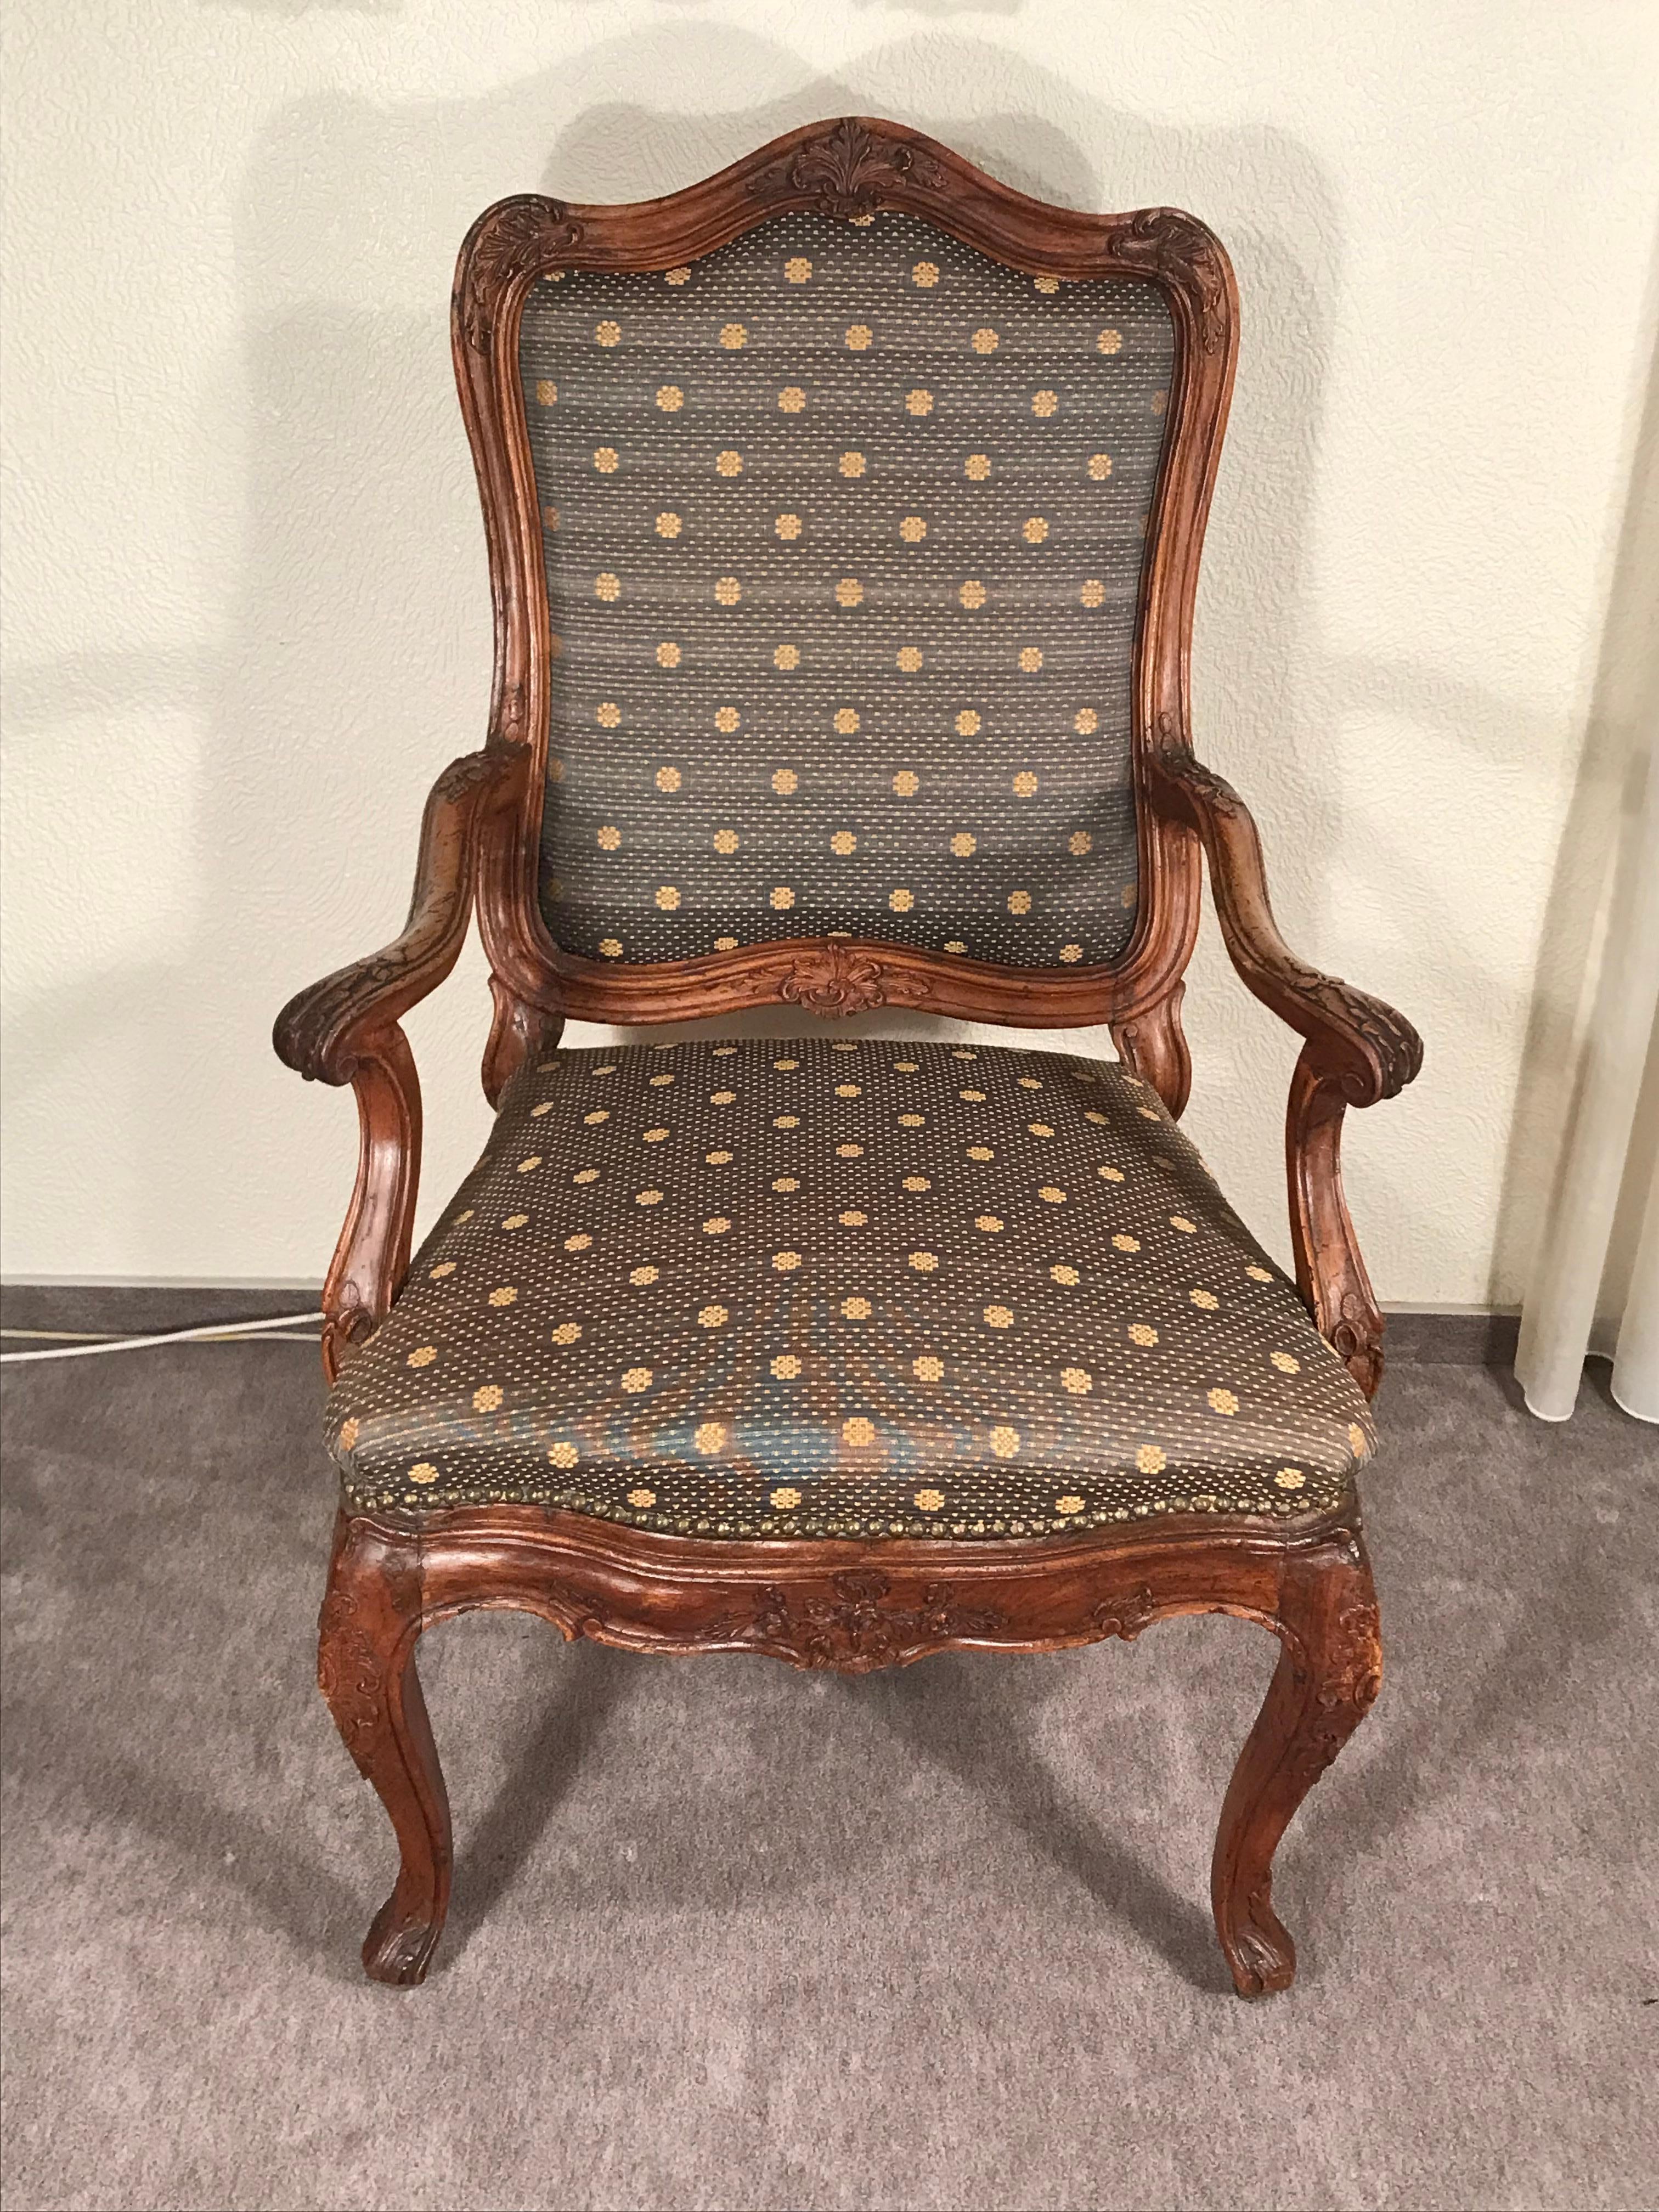 Original and unique Baroque armchair. This beautiful armchair dates back to 1750-60 and comes from Southern Germany. The oak chair stands out for its beautifully hand-carved details. It is in very good condition. The armchair ships from Germany and